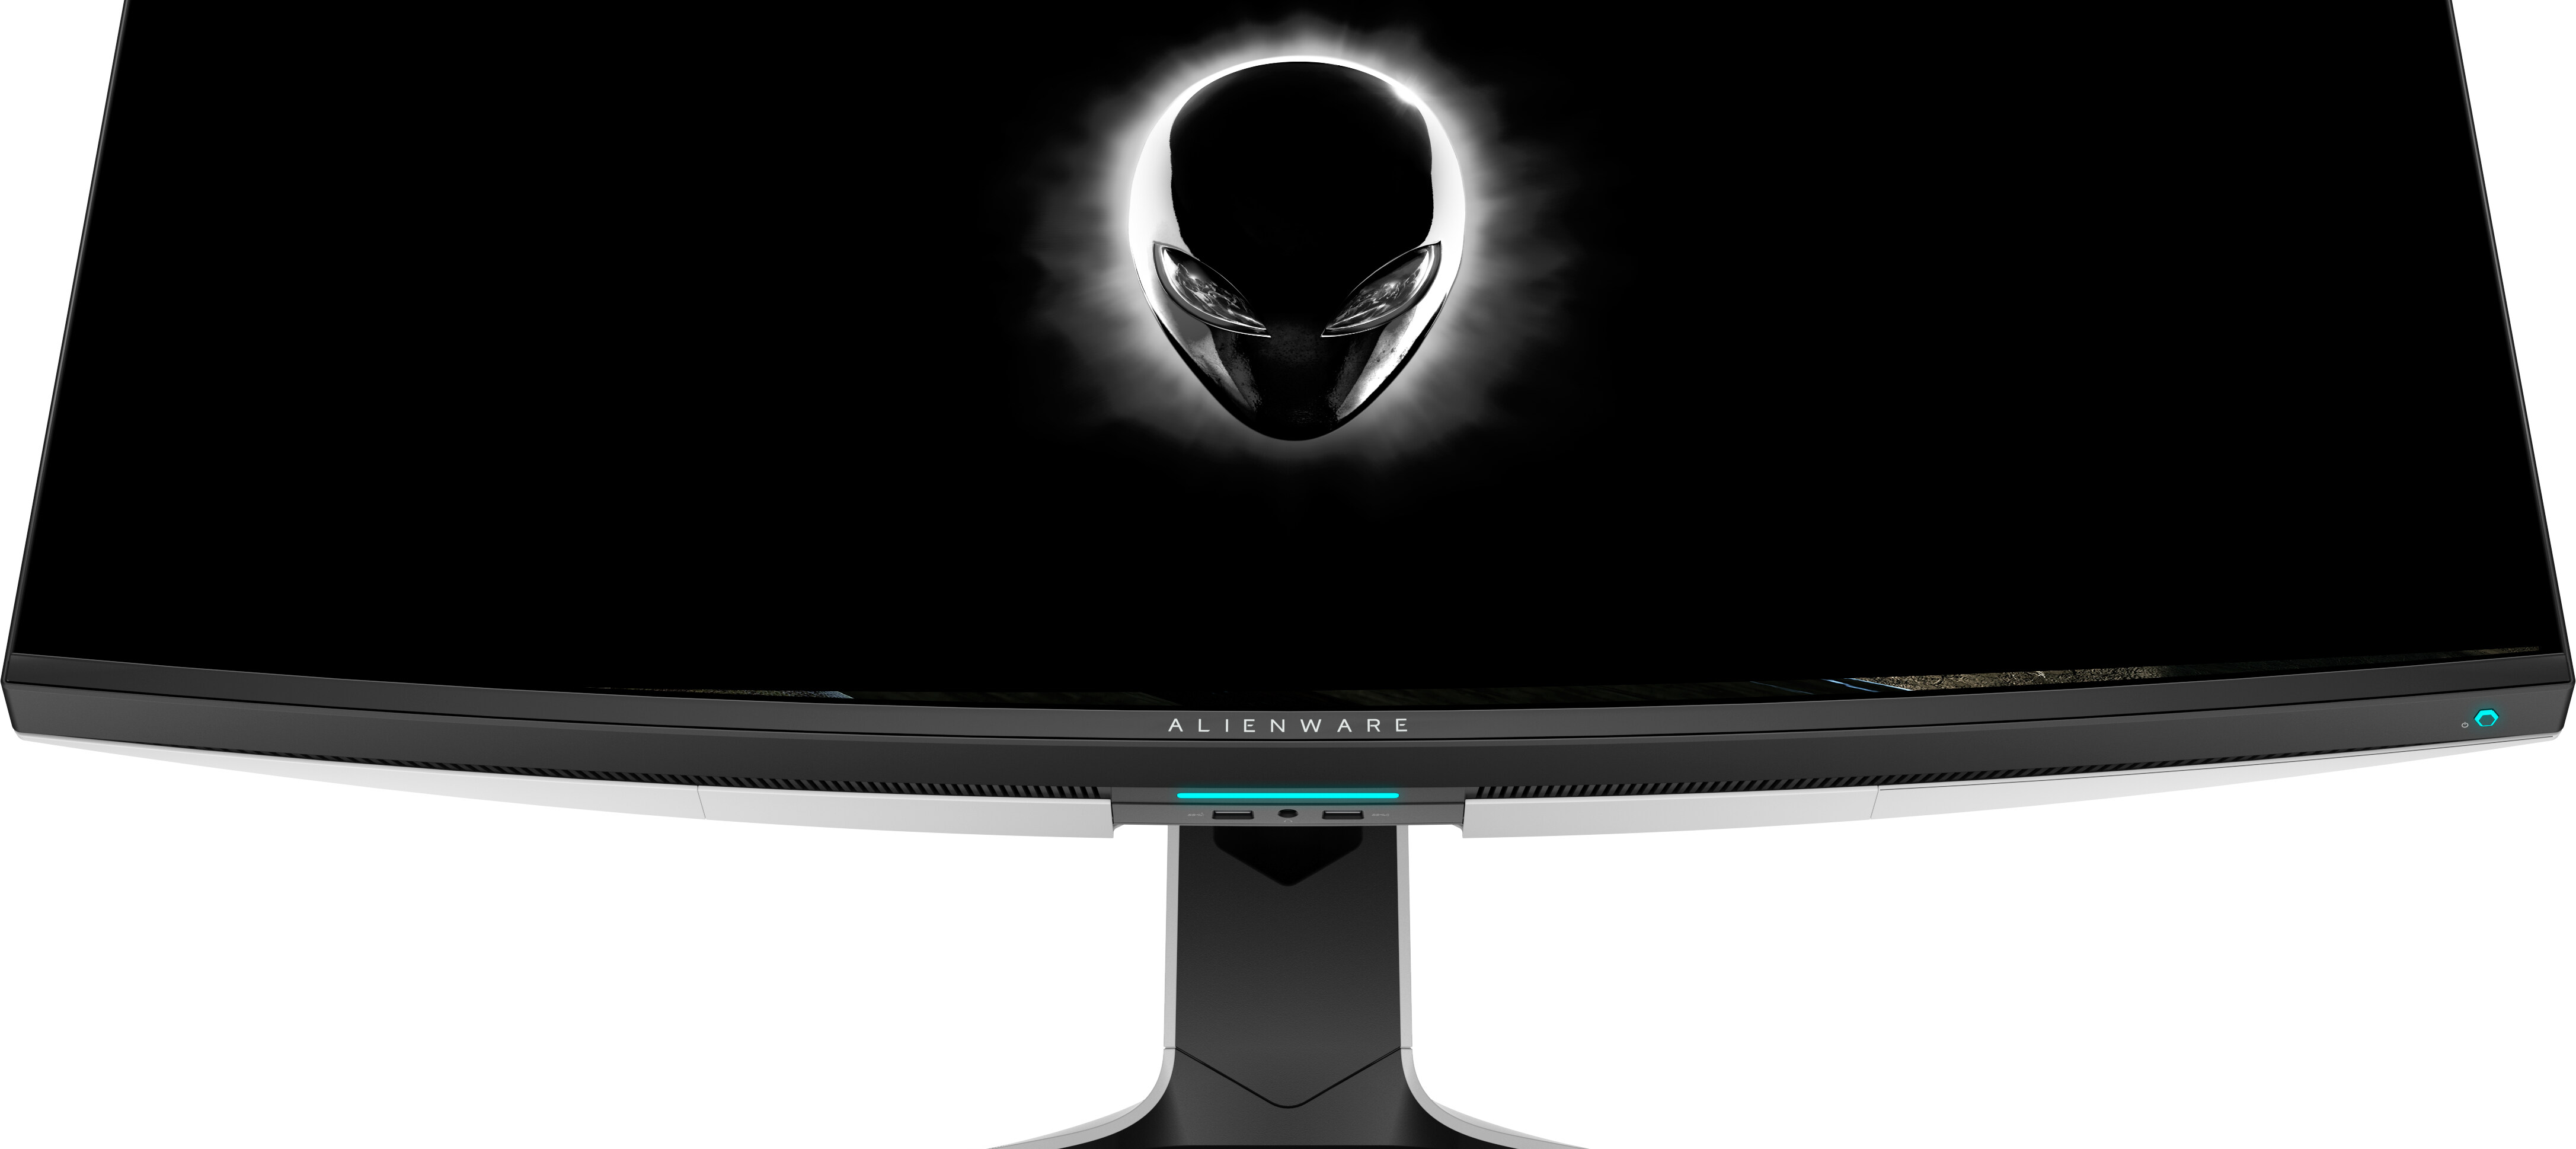 DELL ALIENWARE AW3821DW 37.5インチ